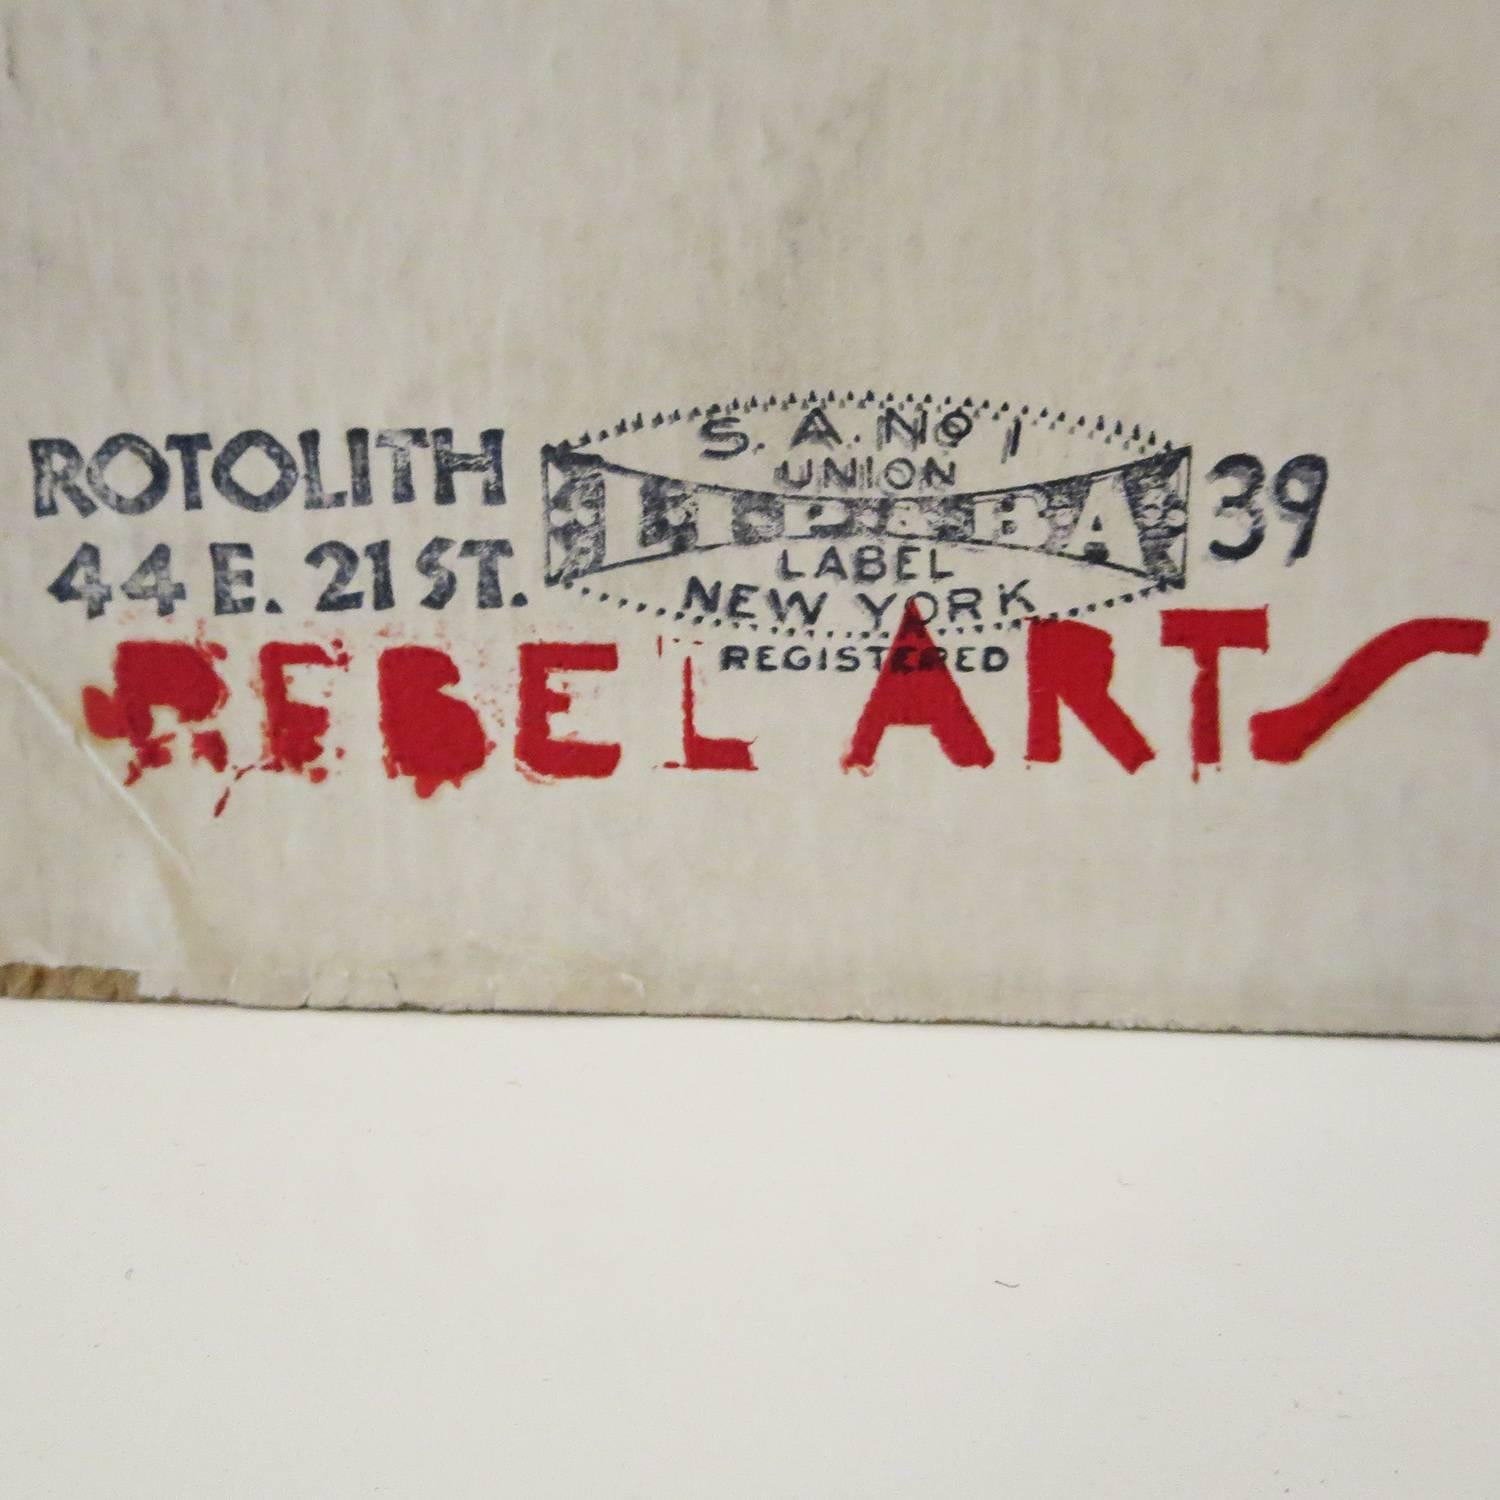 Founded in New York City in 1934, the Rebel Arts Group was led by Socialist Party officer Samuel Friedman. The Greenwich Village group produced music, plays, and murals protesting the social ills of the day. They also created a small number of